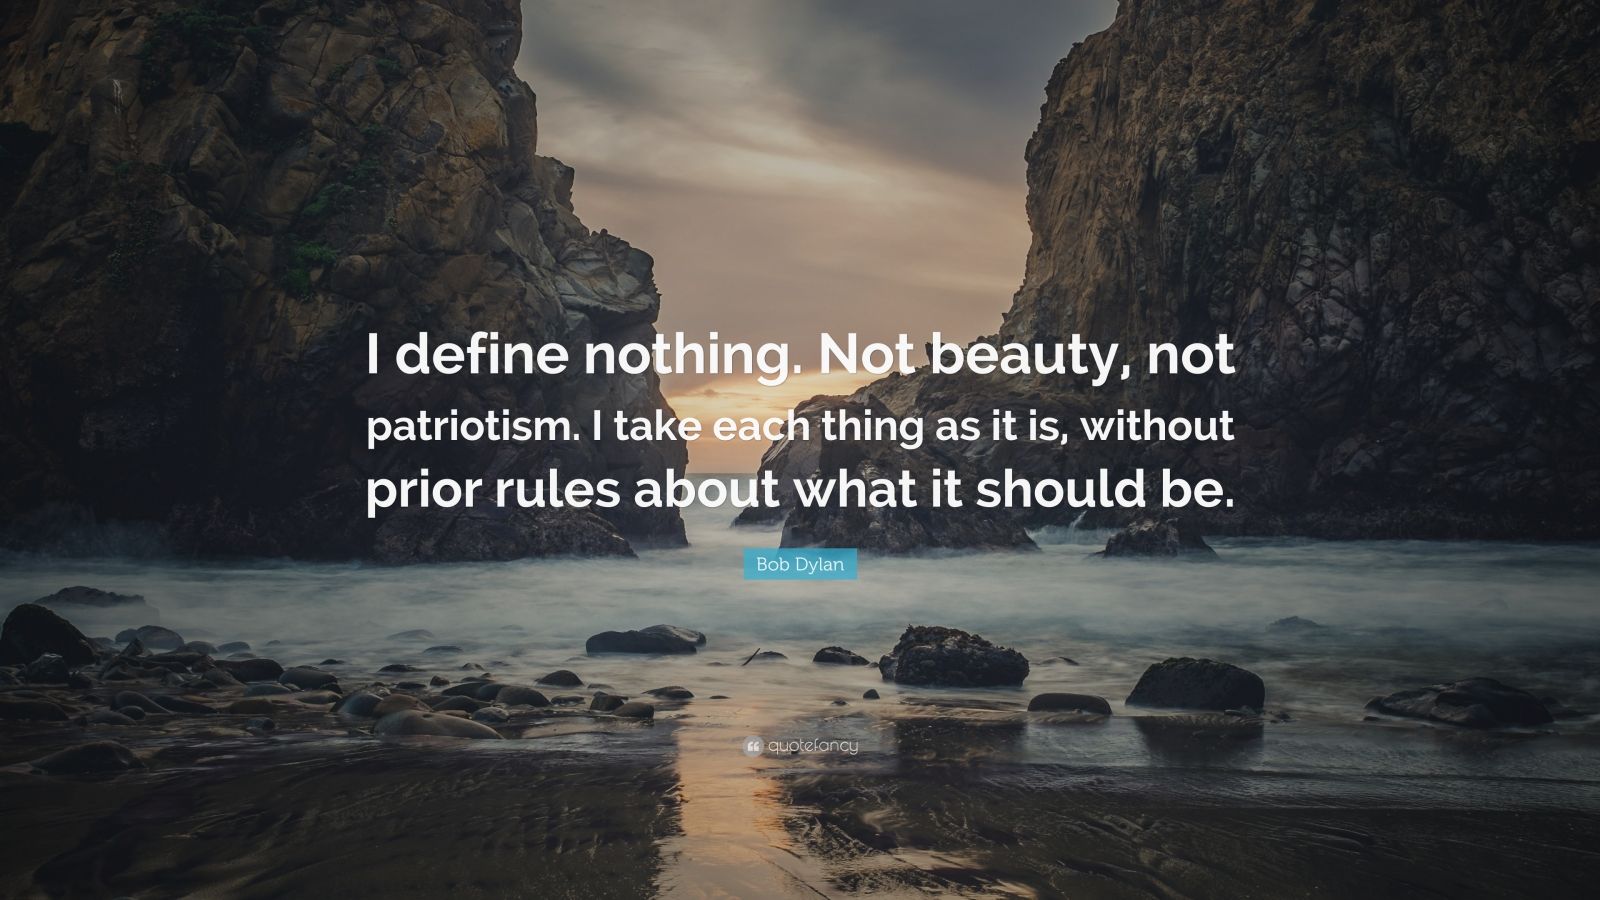 Bob Dylan Quote: “I define nothing. Not beauty, not patriotism. I take